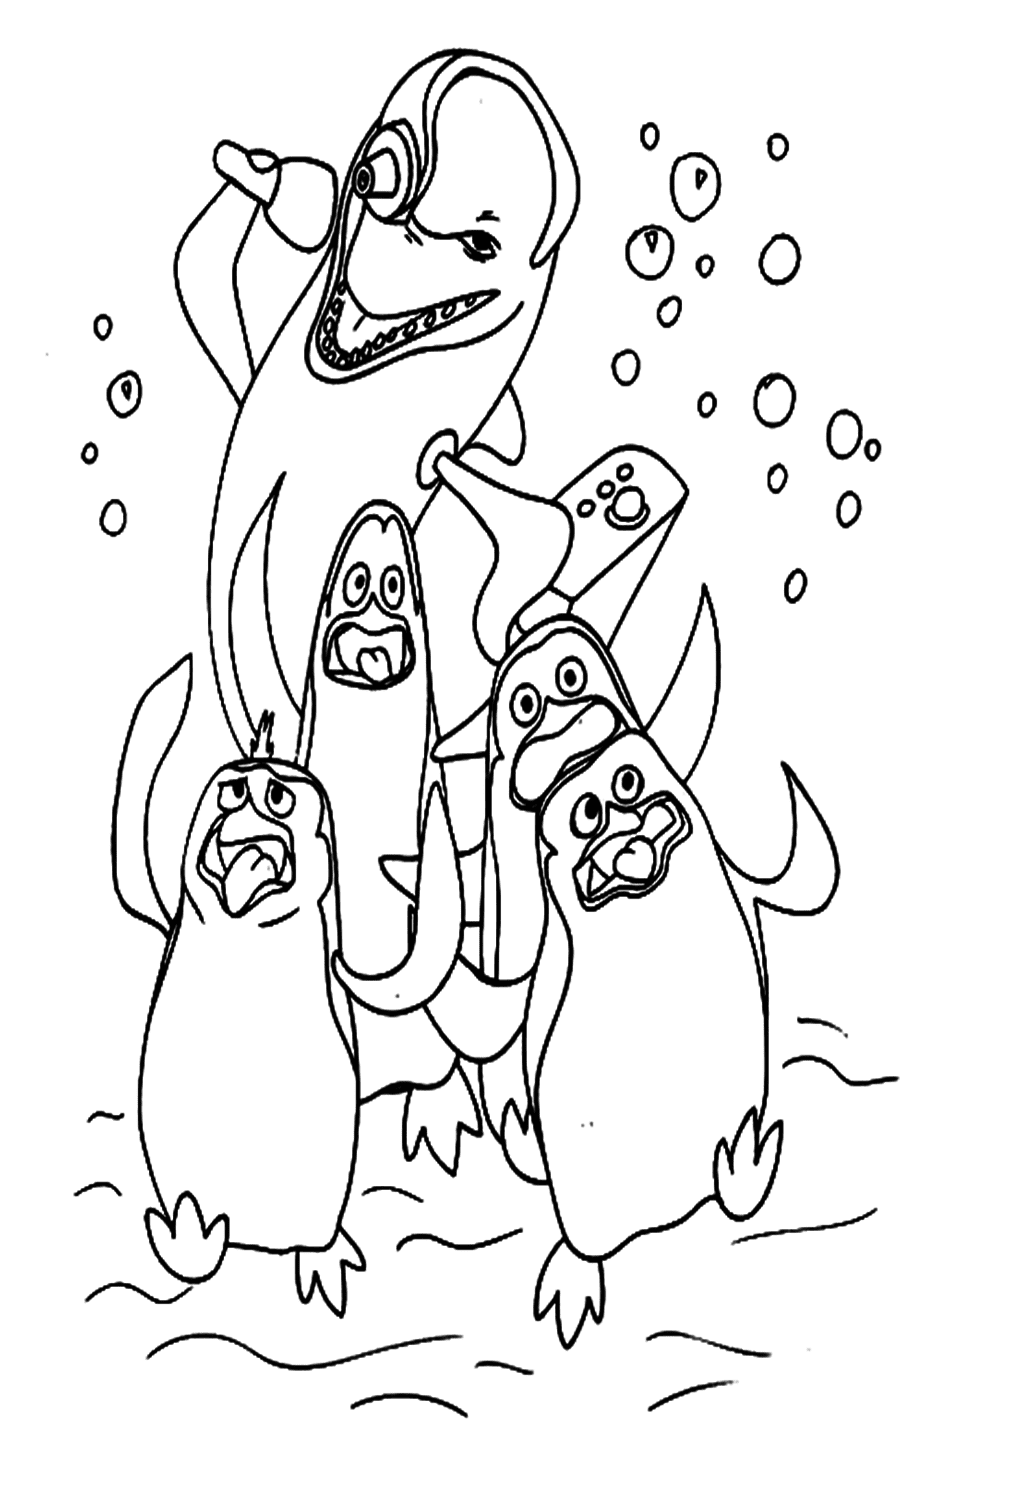 Penguins Of Madagascar Printable Coloring Page